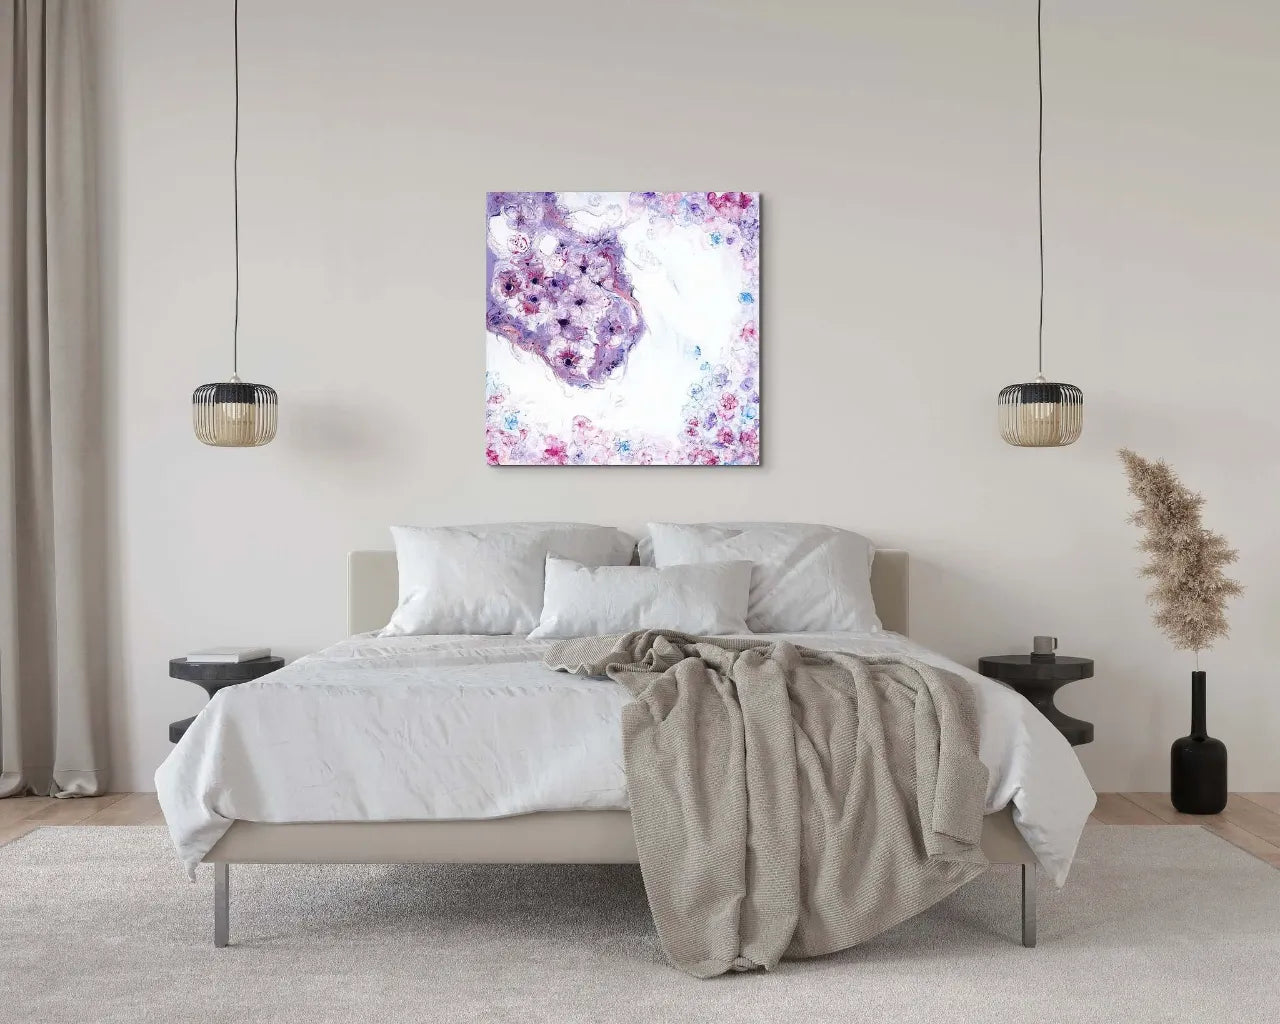 Abstract-Artwork-by-Sung-Lee-Nature-Series-Jacaranda-One-Bedroom-Chromaluxe-Limited-Edition-Print-Australia